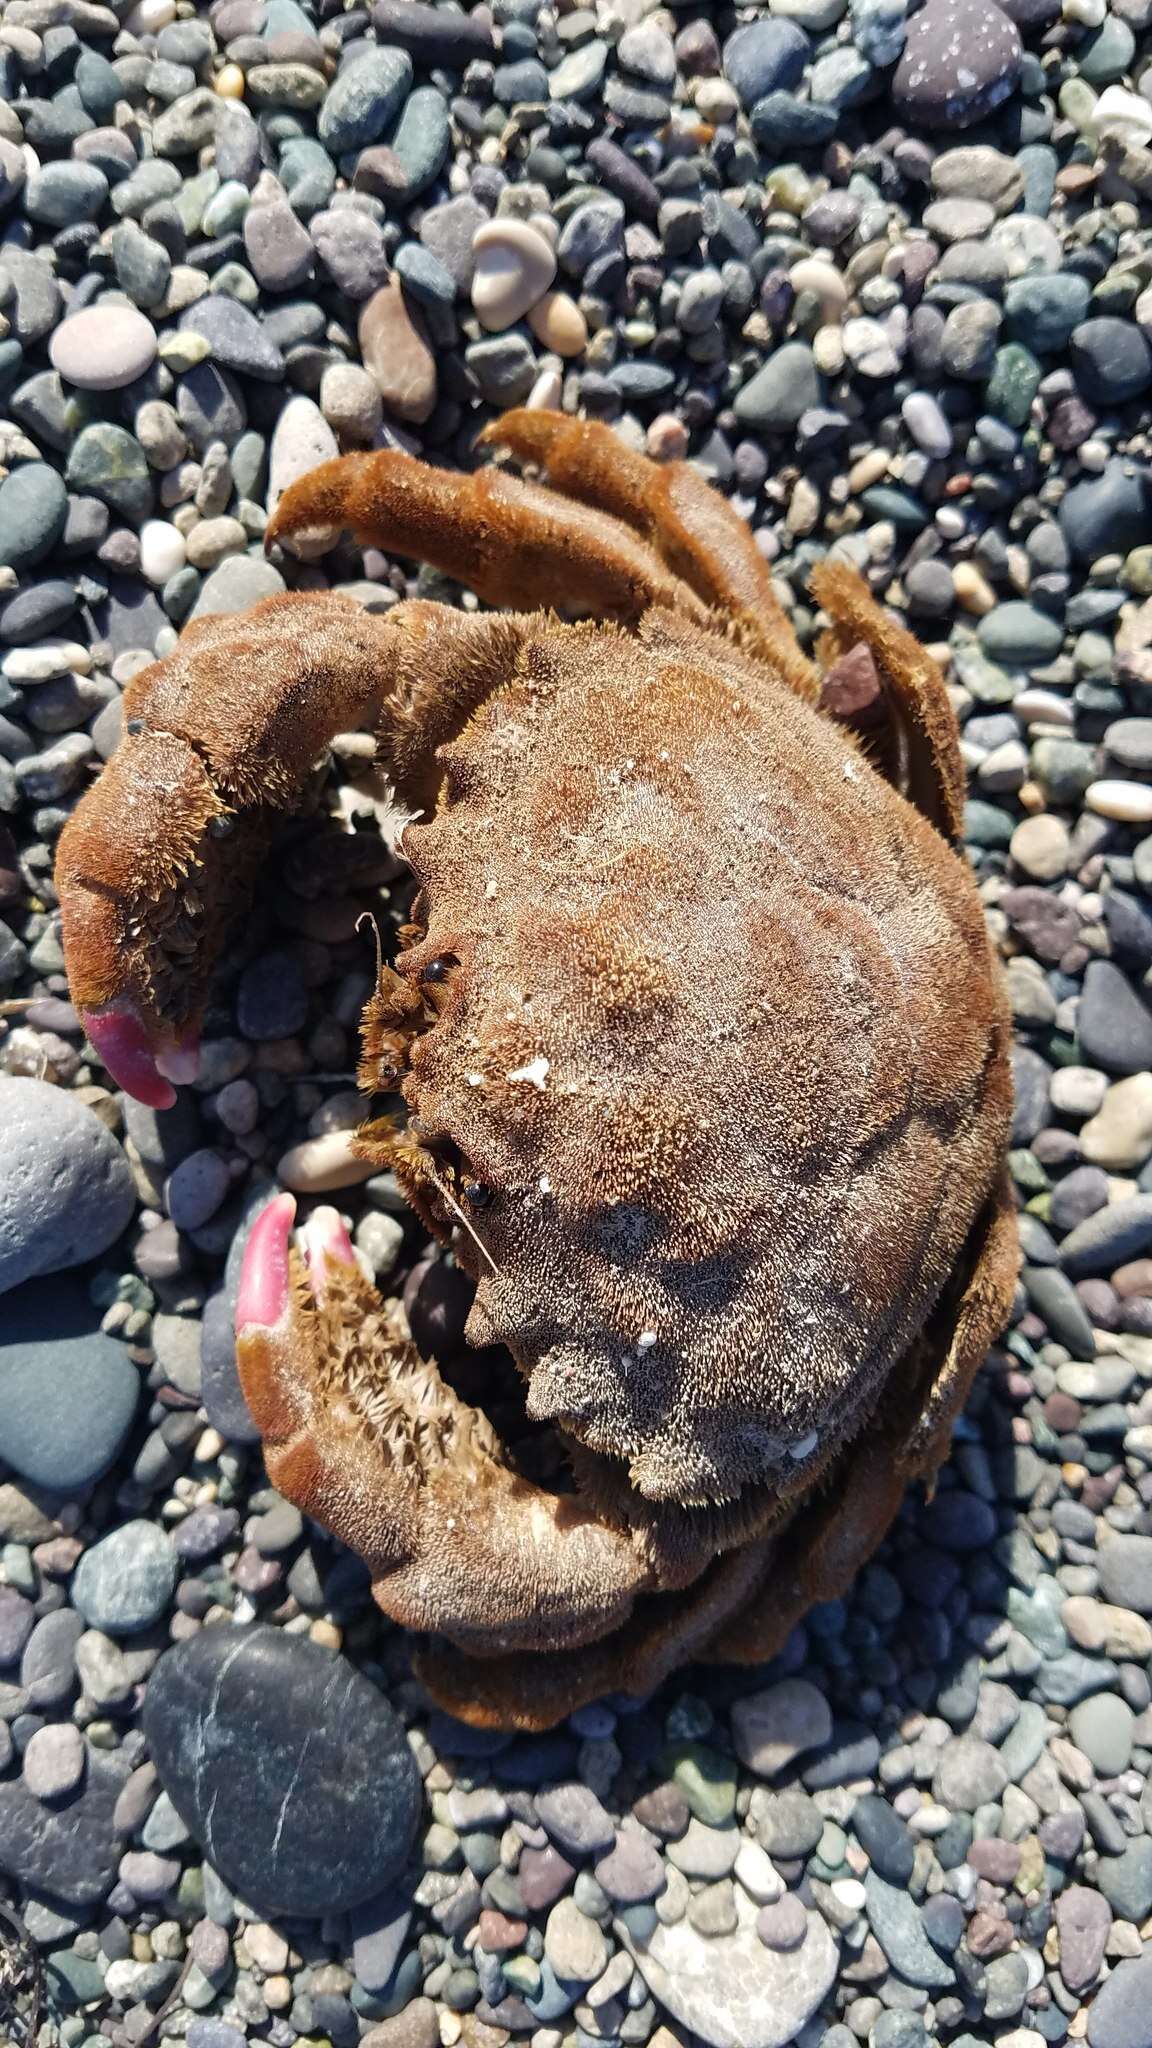 Image of large sponge-carrying crab